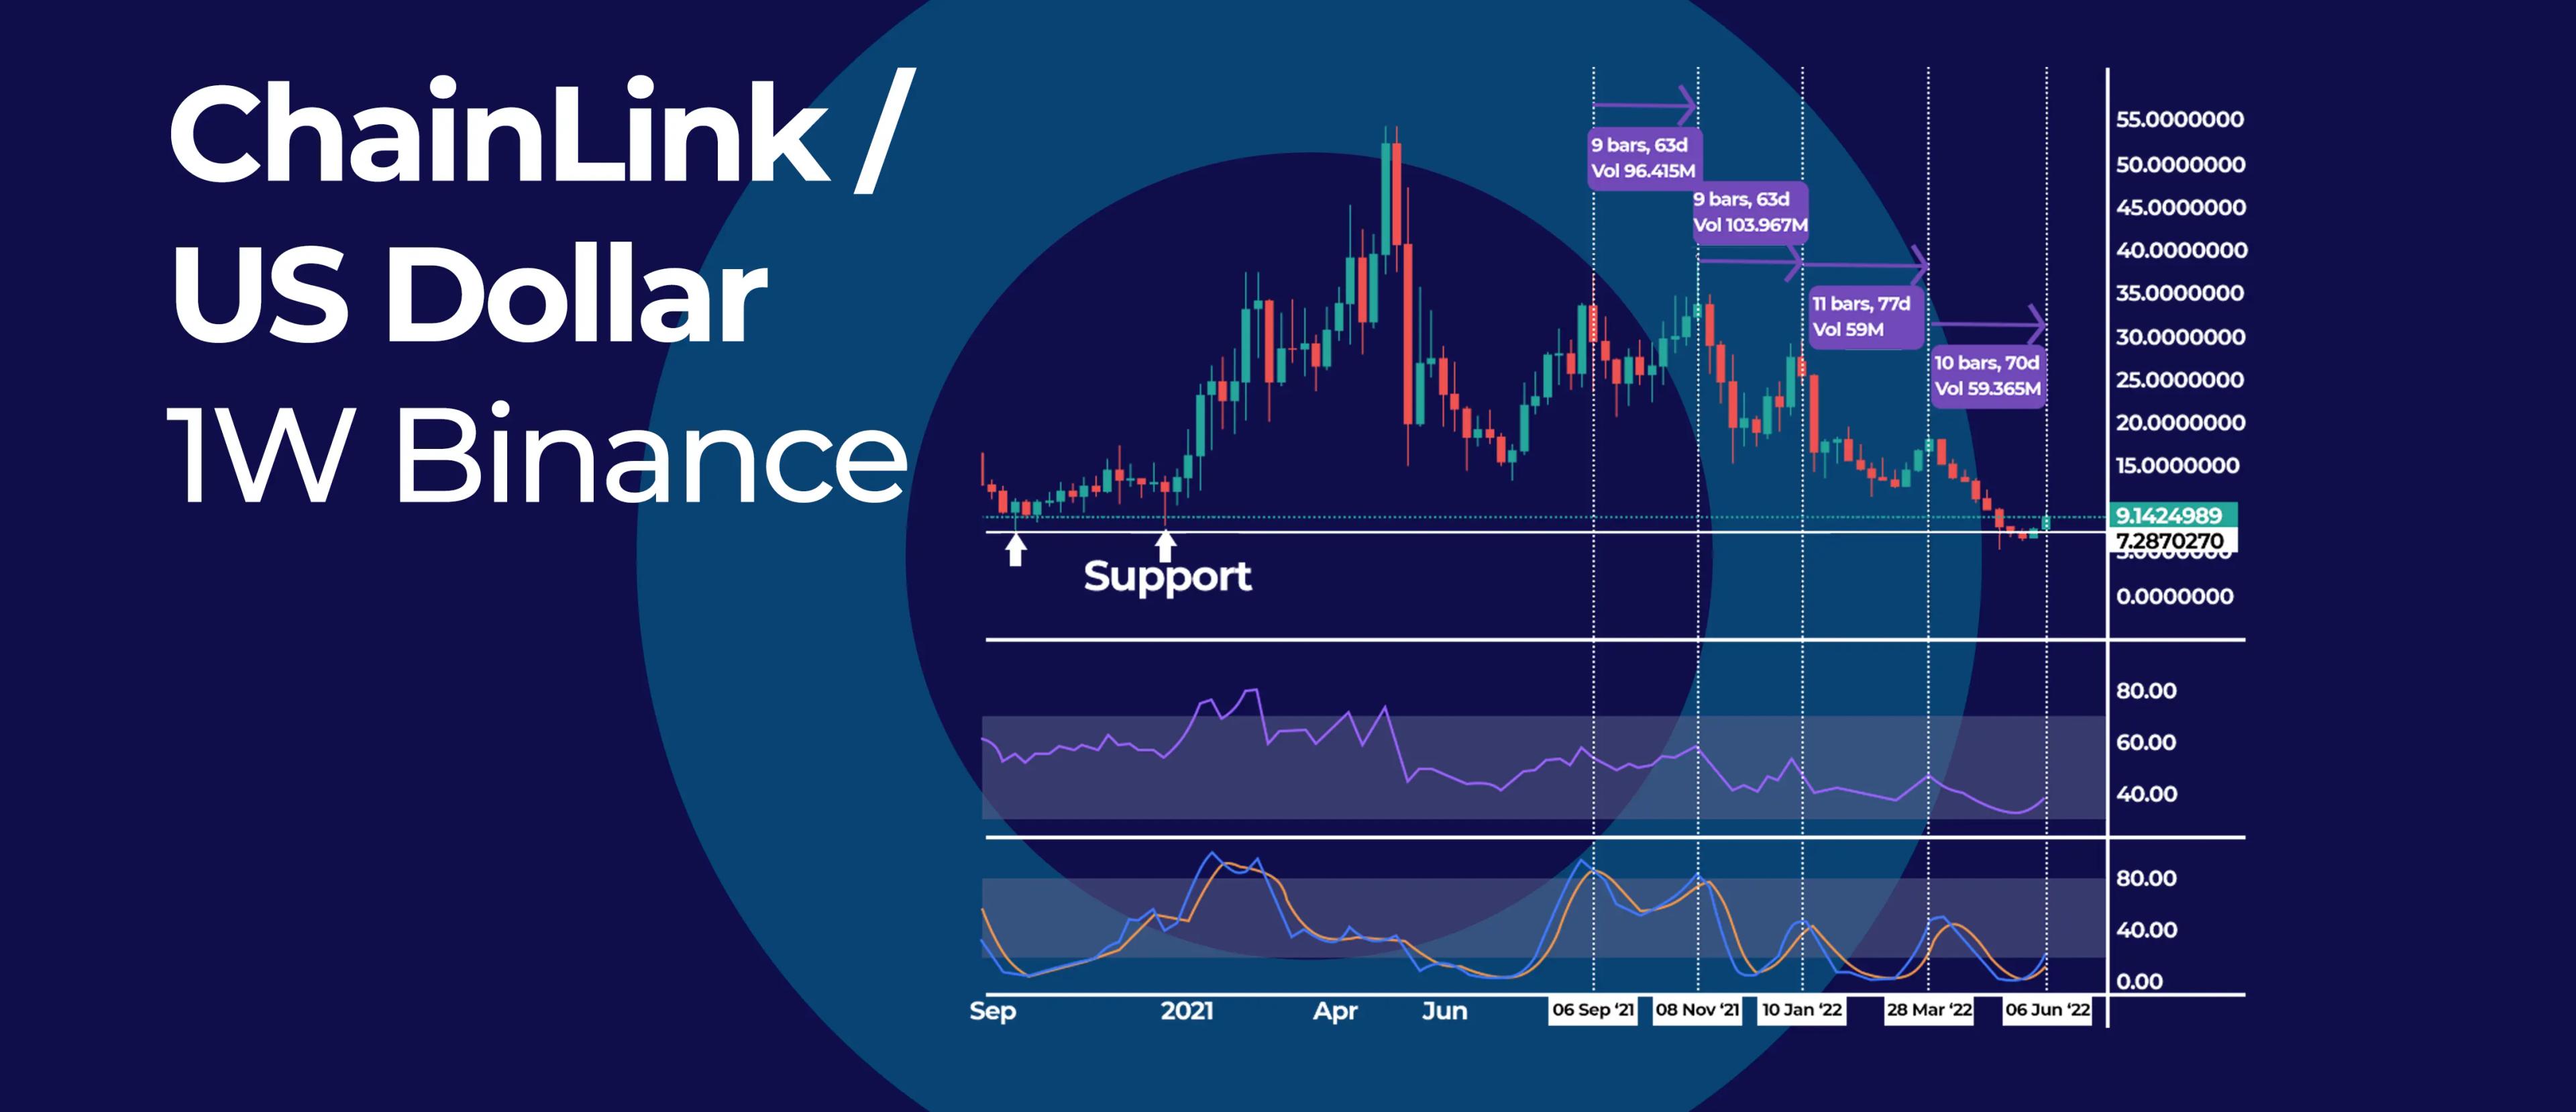 ChainLink Follows a 10 Week High-to-High Cycle